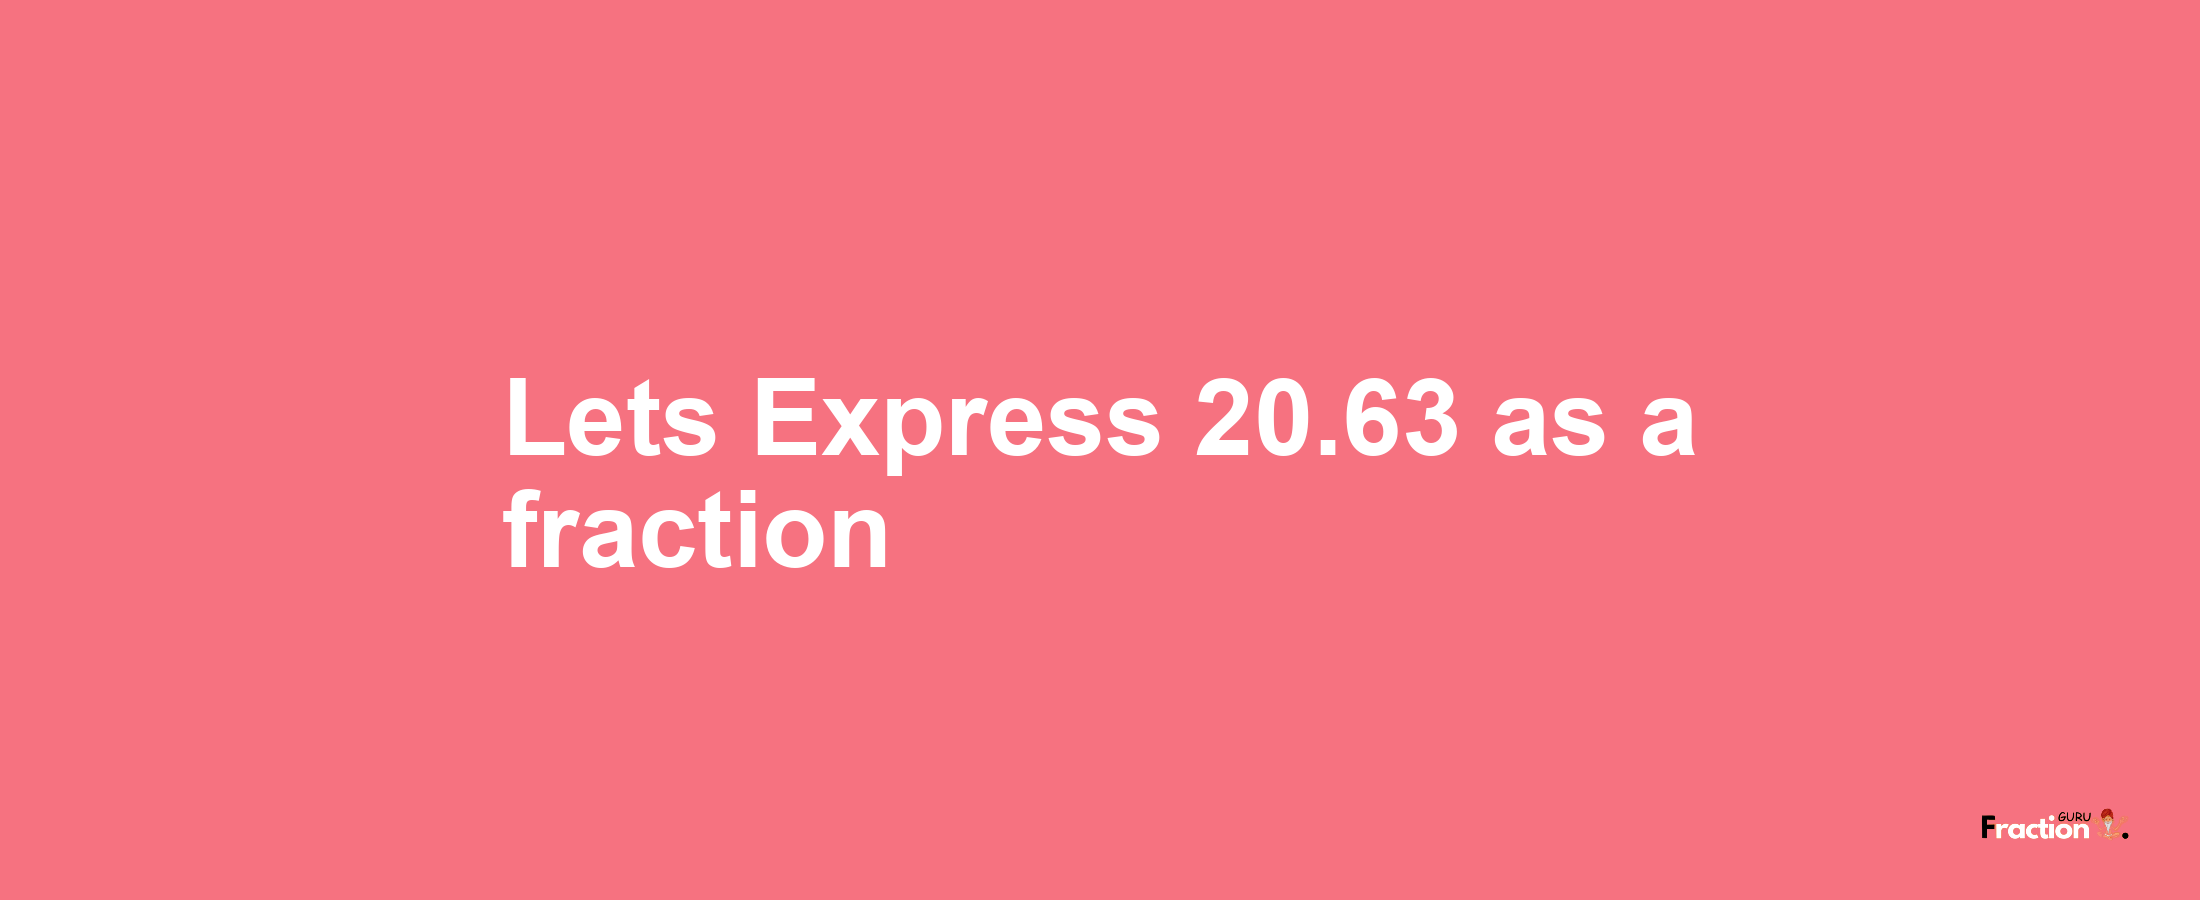 Lets Express 20.63 as afraction